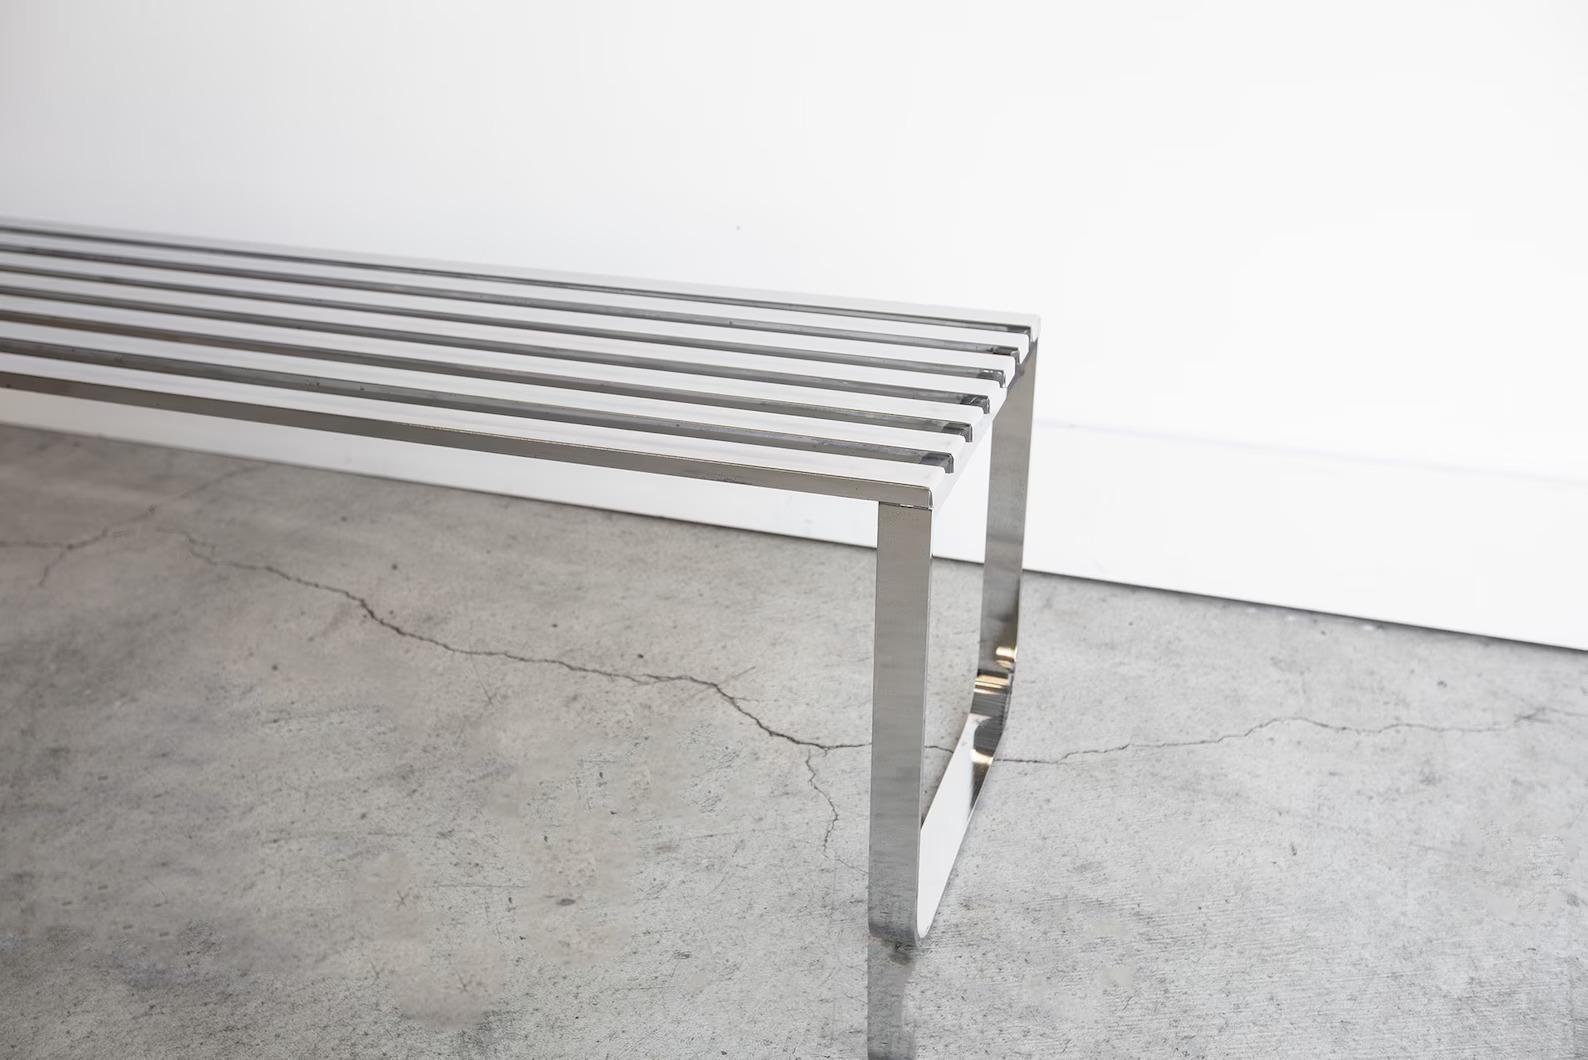 Post-Modern Vintage Milo Baughman Chrome Slatted Coffee Table Bench for DIA circa 1970s For Sale